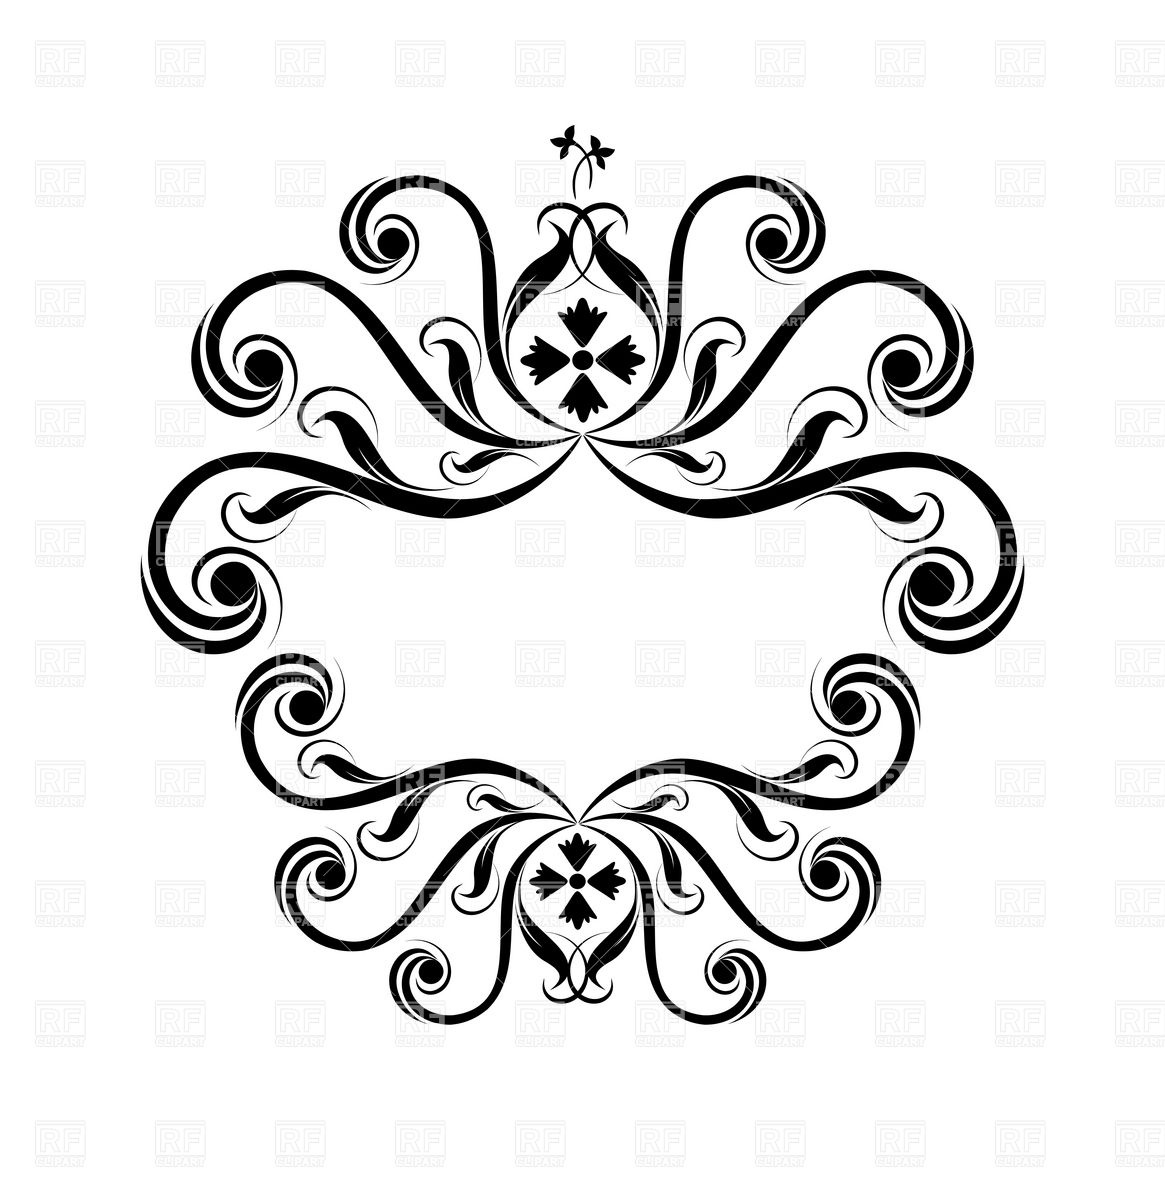 Royal Frame Made Of Curls Download Royalty Free Vector Clipart  Eps